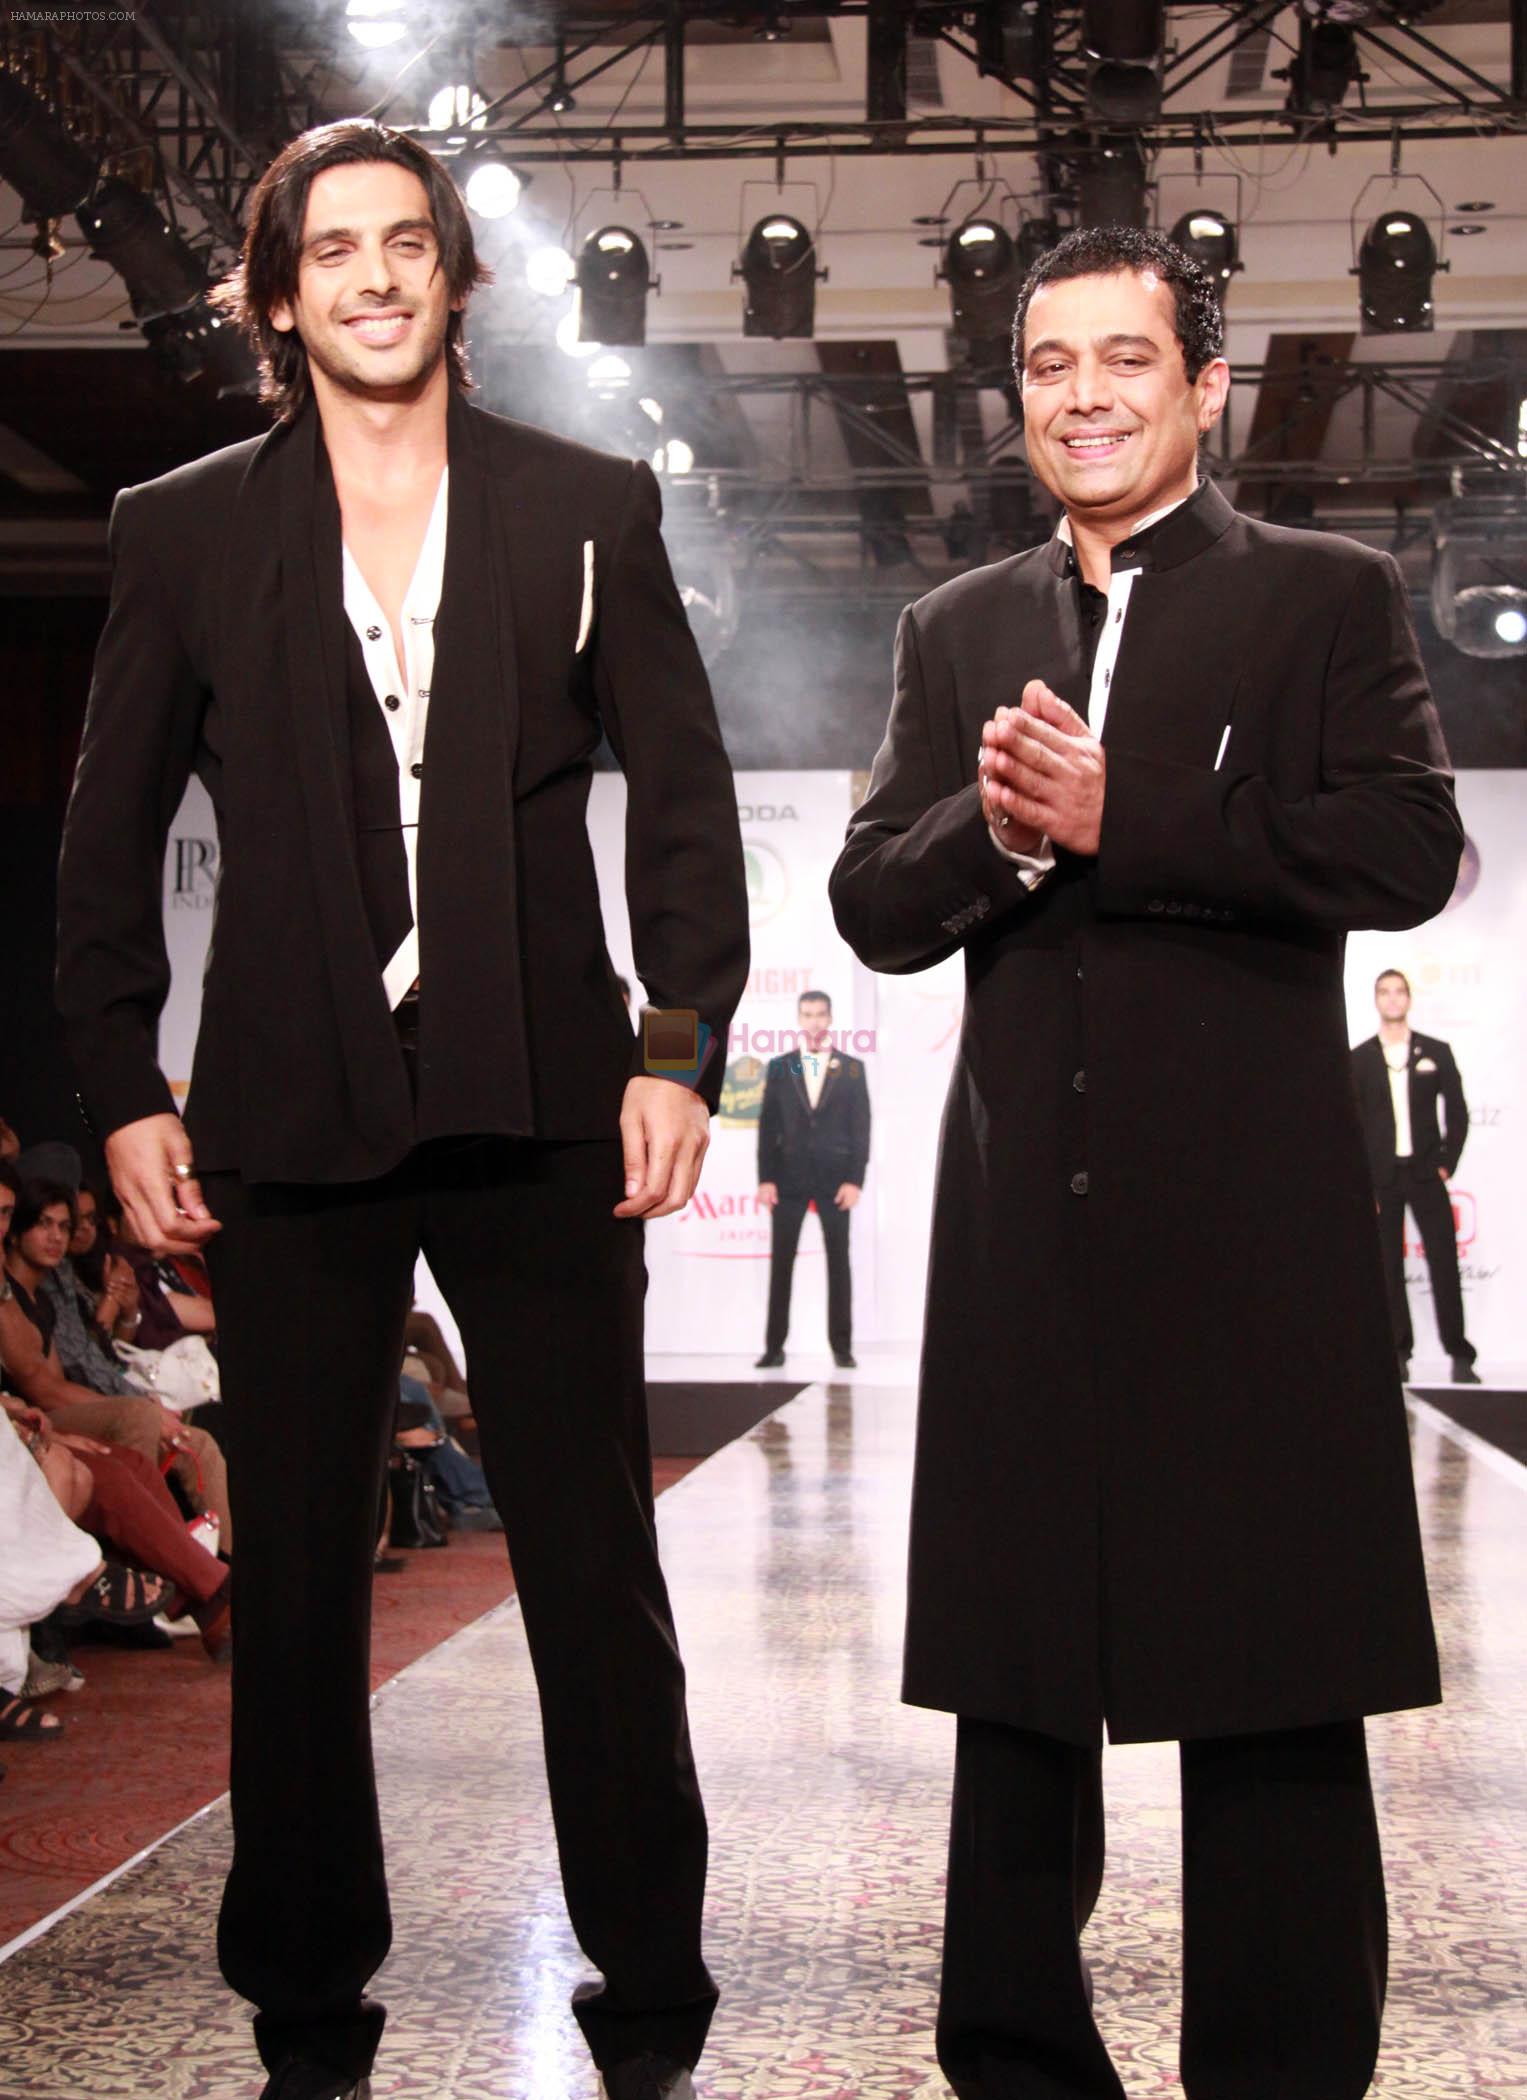 zayed khan & shaahid amir at day one of Rajasthan Fashion week at Marriott in Jaipur on 24th May 2012